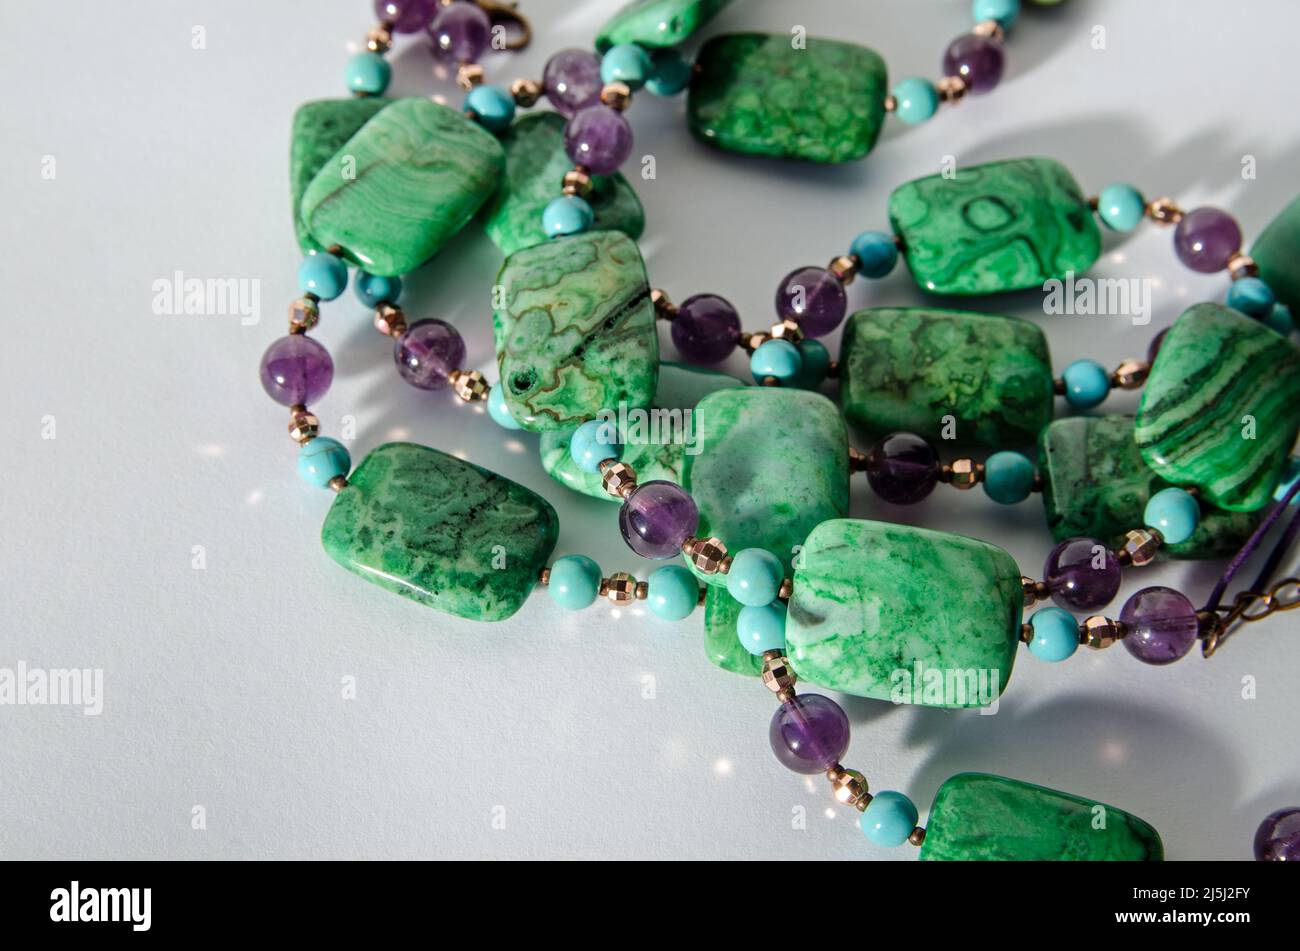 Coils of a handcrafted necklace made with beads of purple amethyst, blue turquoise and green crazy agate beads. Viewed on a white background with drop Stock Photo